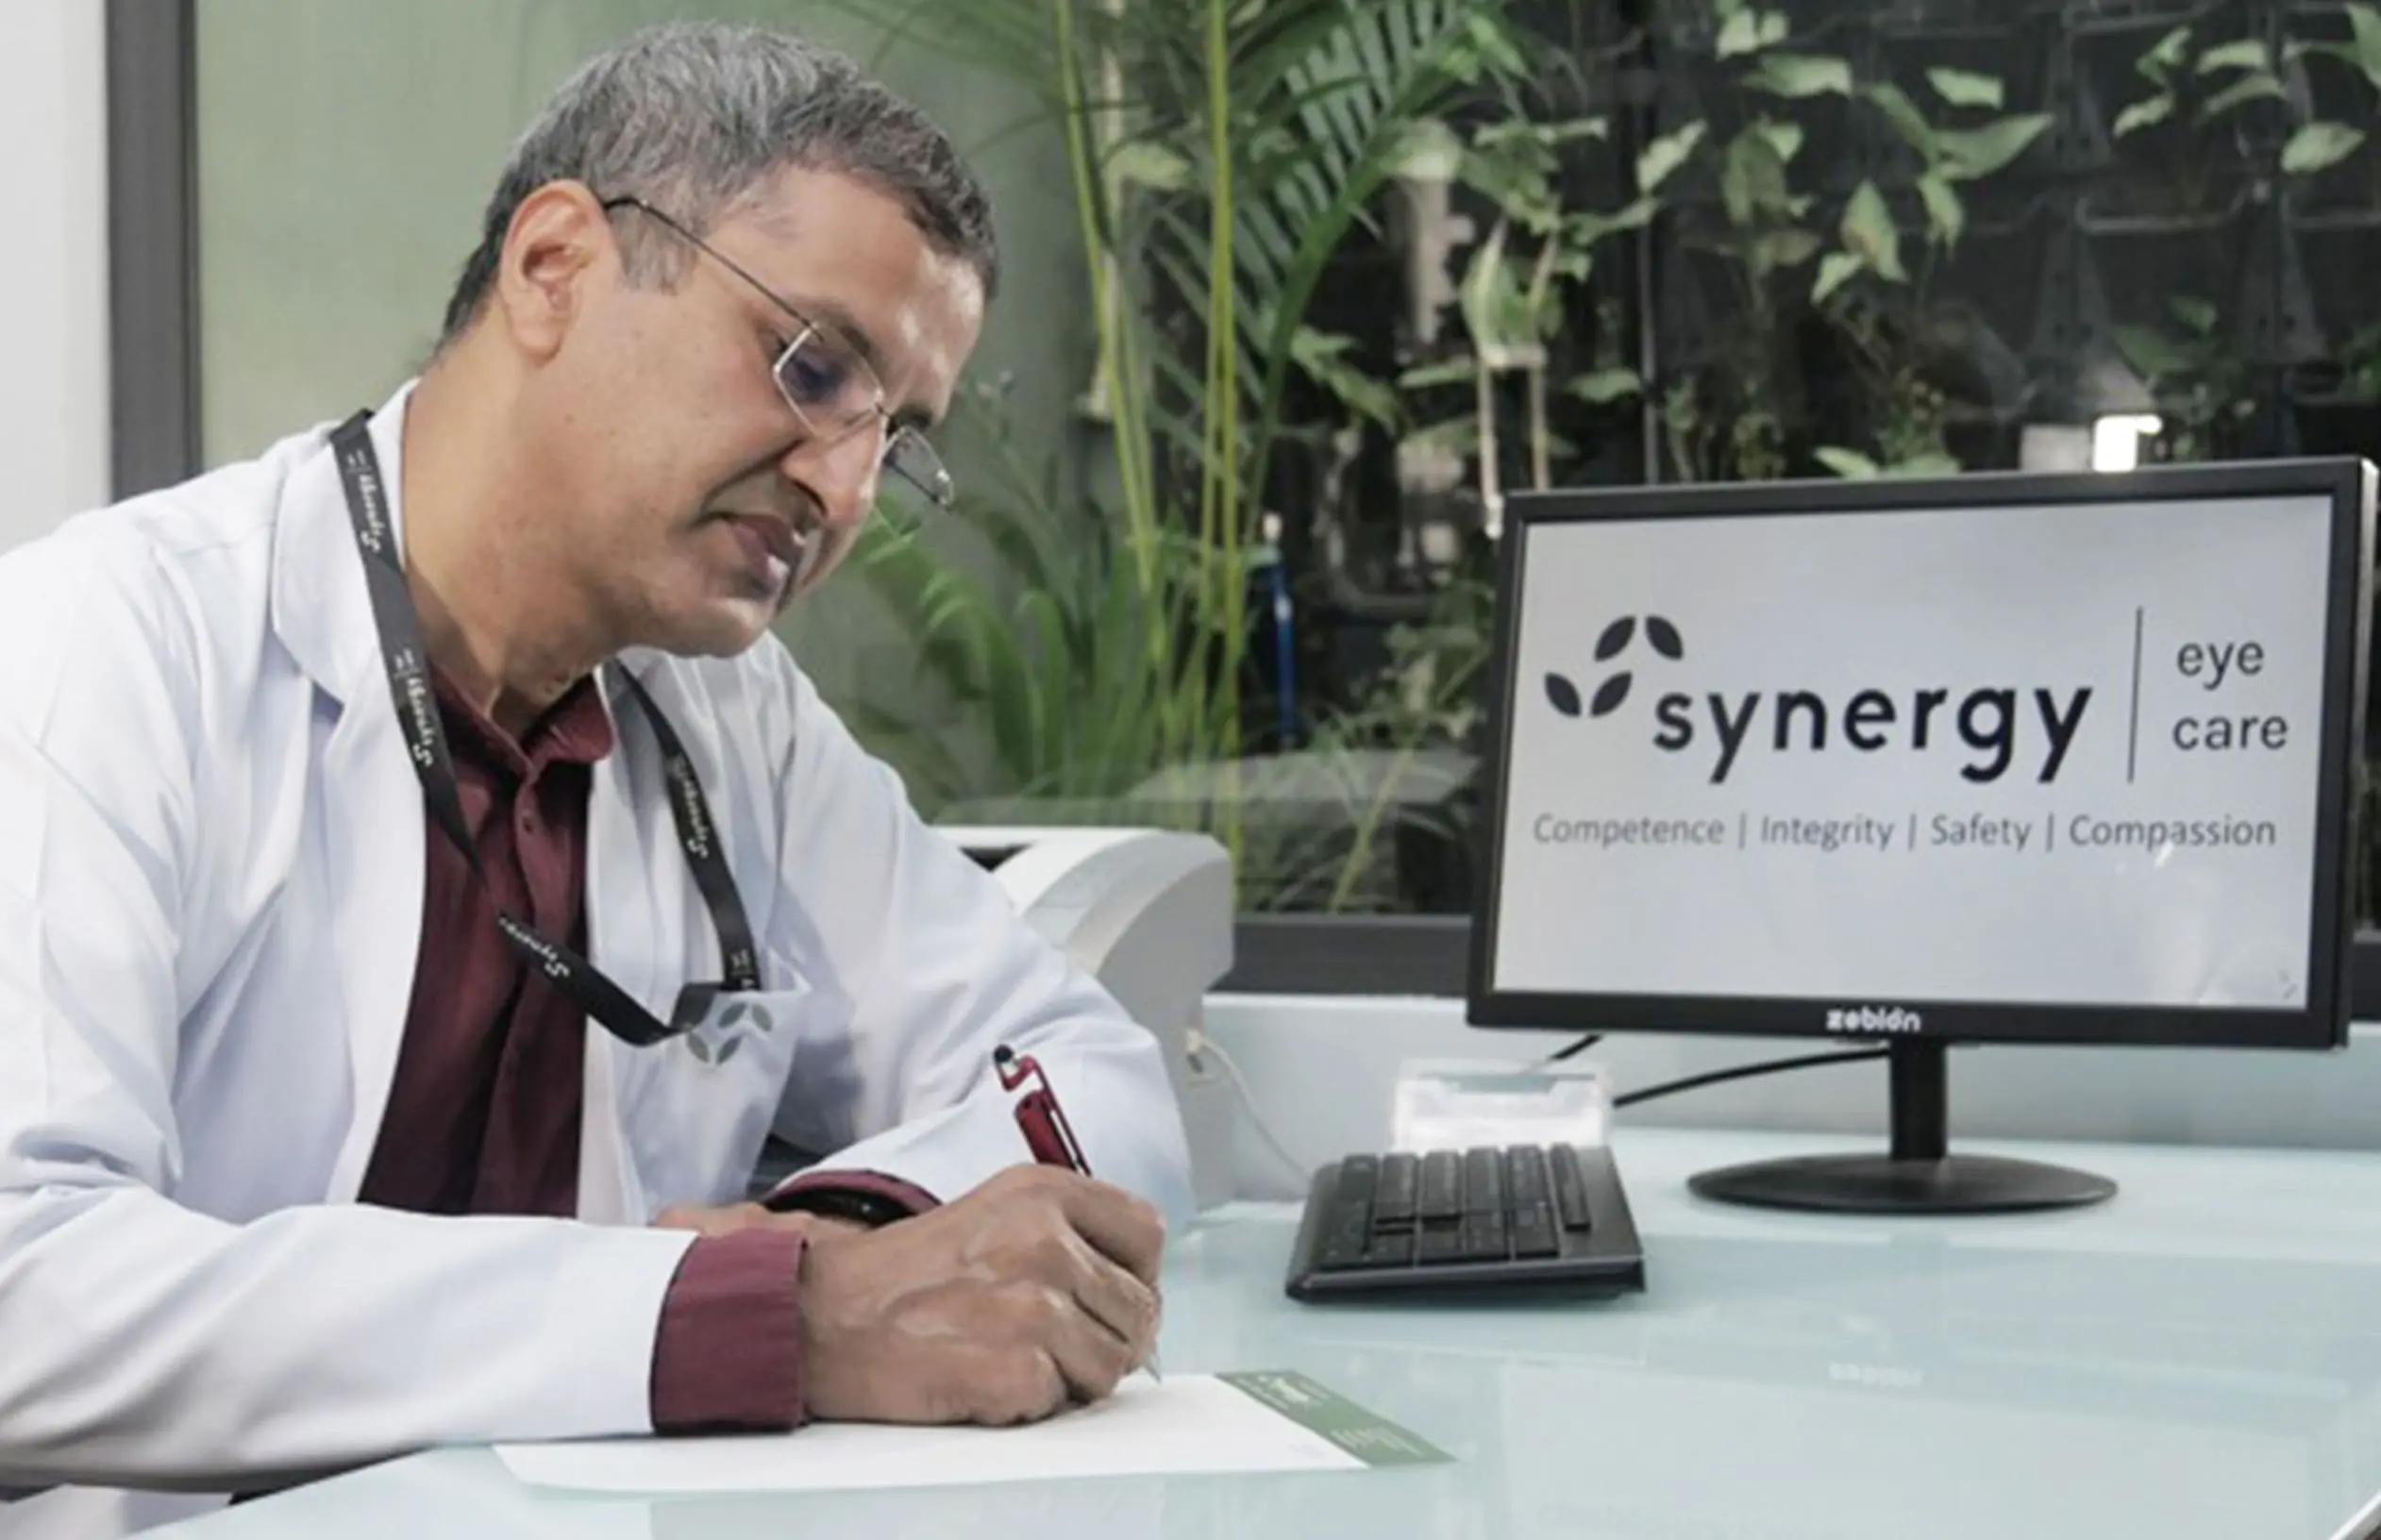 Meet Our Experts from Synergy Eye Care